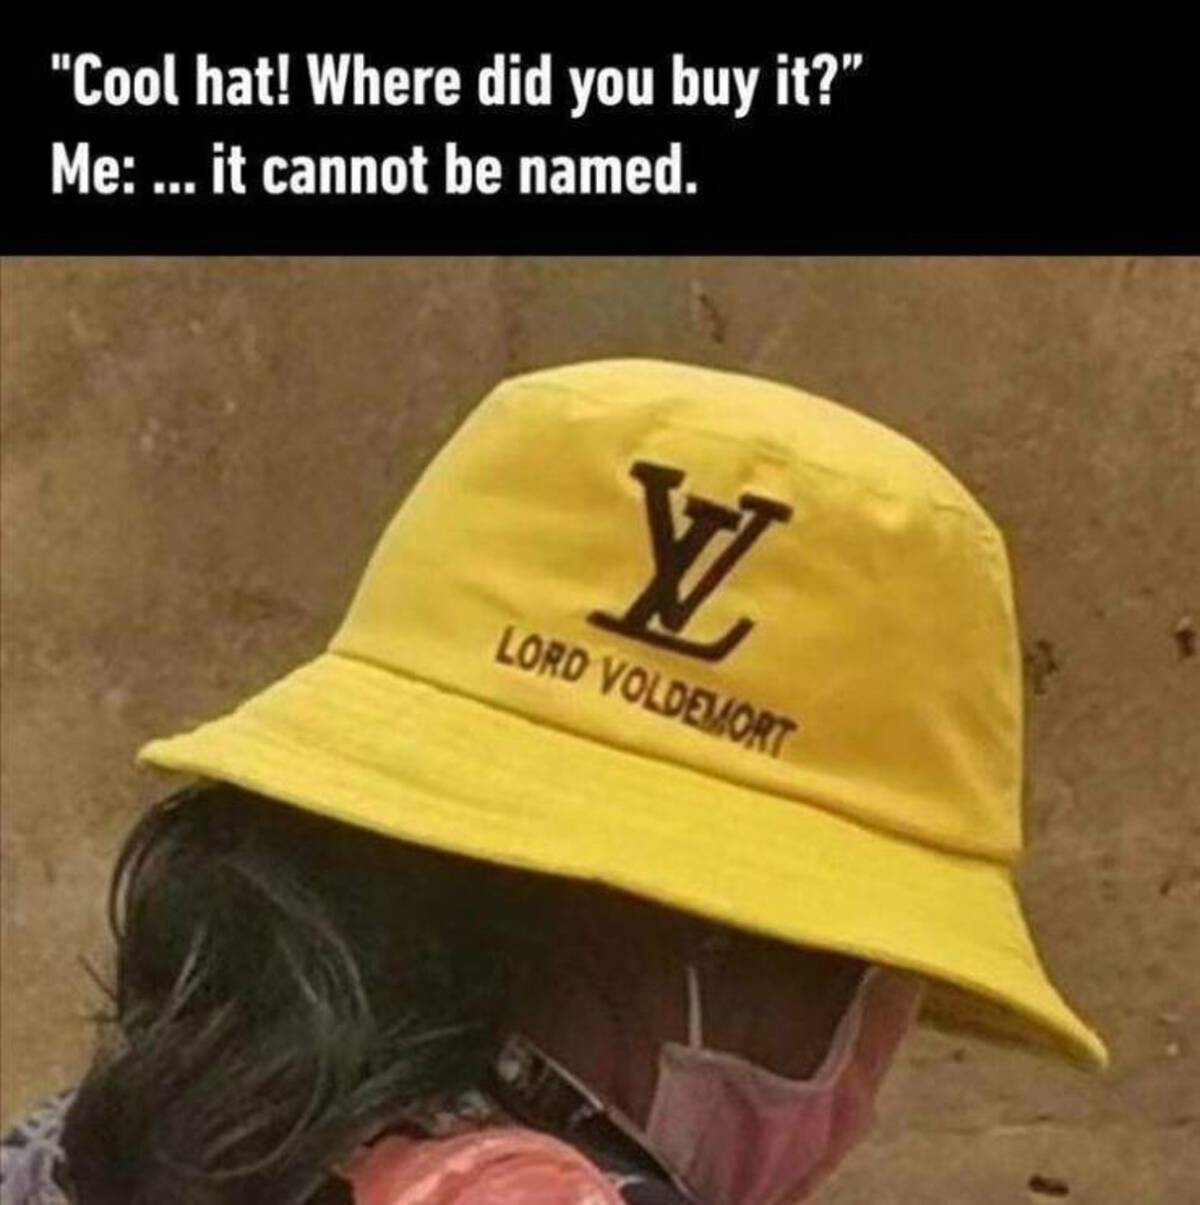 photo caption - "Cool hat! Where did you buy it?" Me ... it cannot be named. Y Lord Voldemort